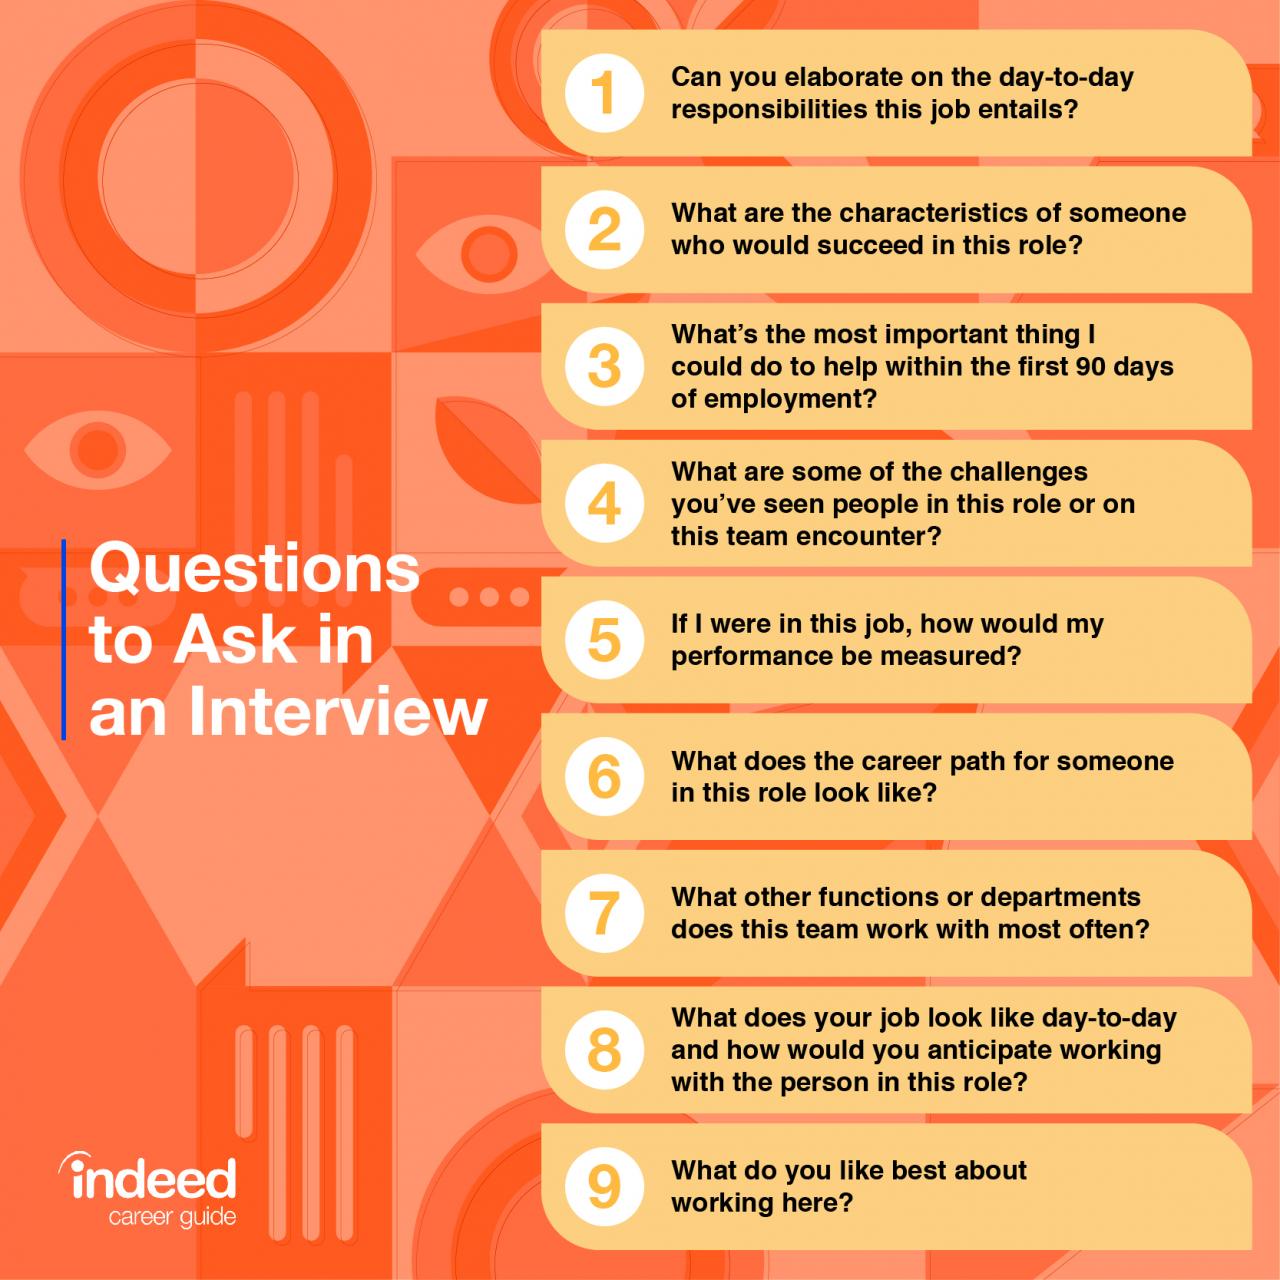 Good questions to ask in an interview as an interviewee